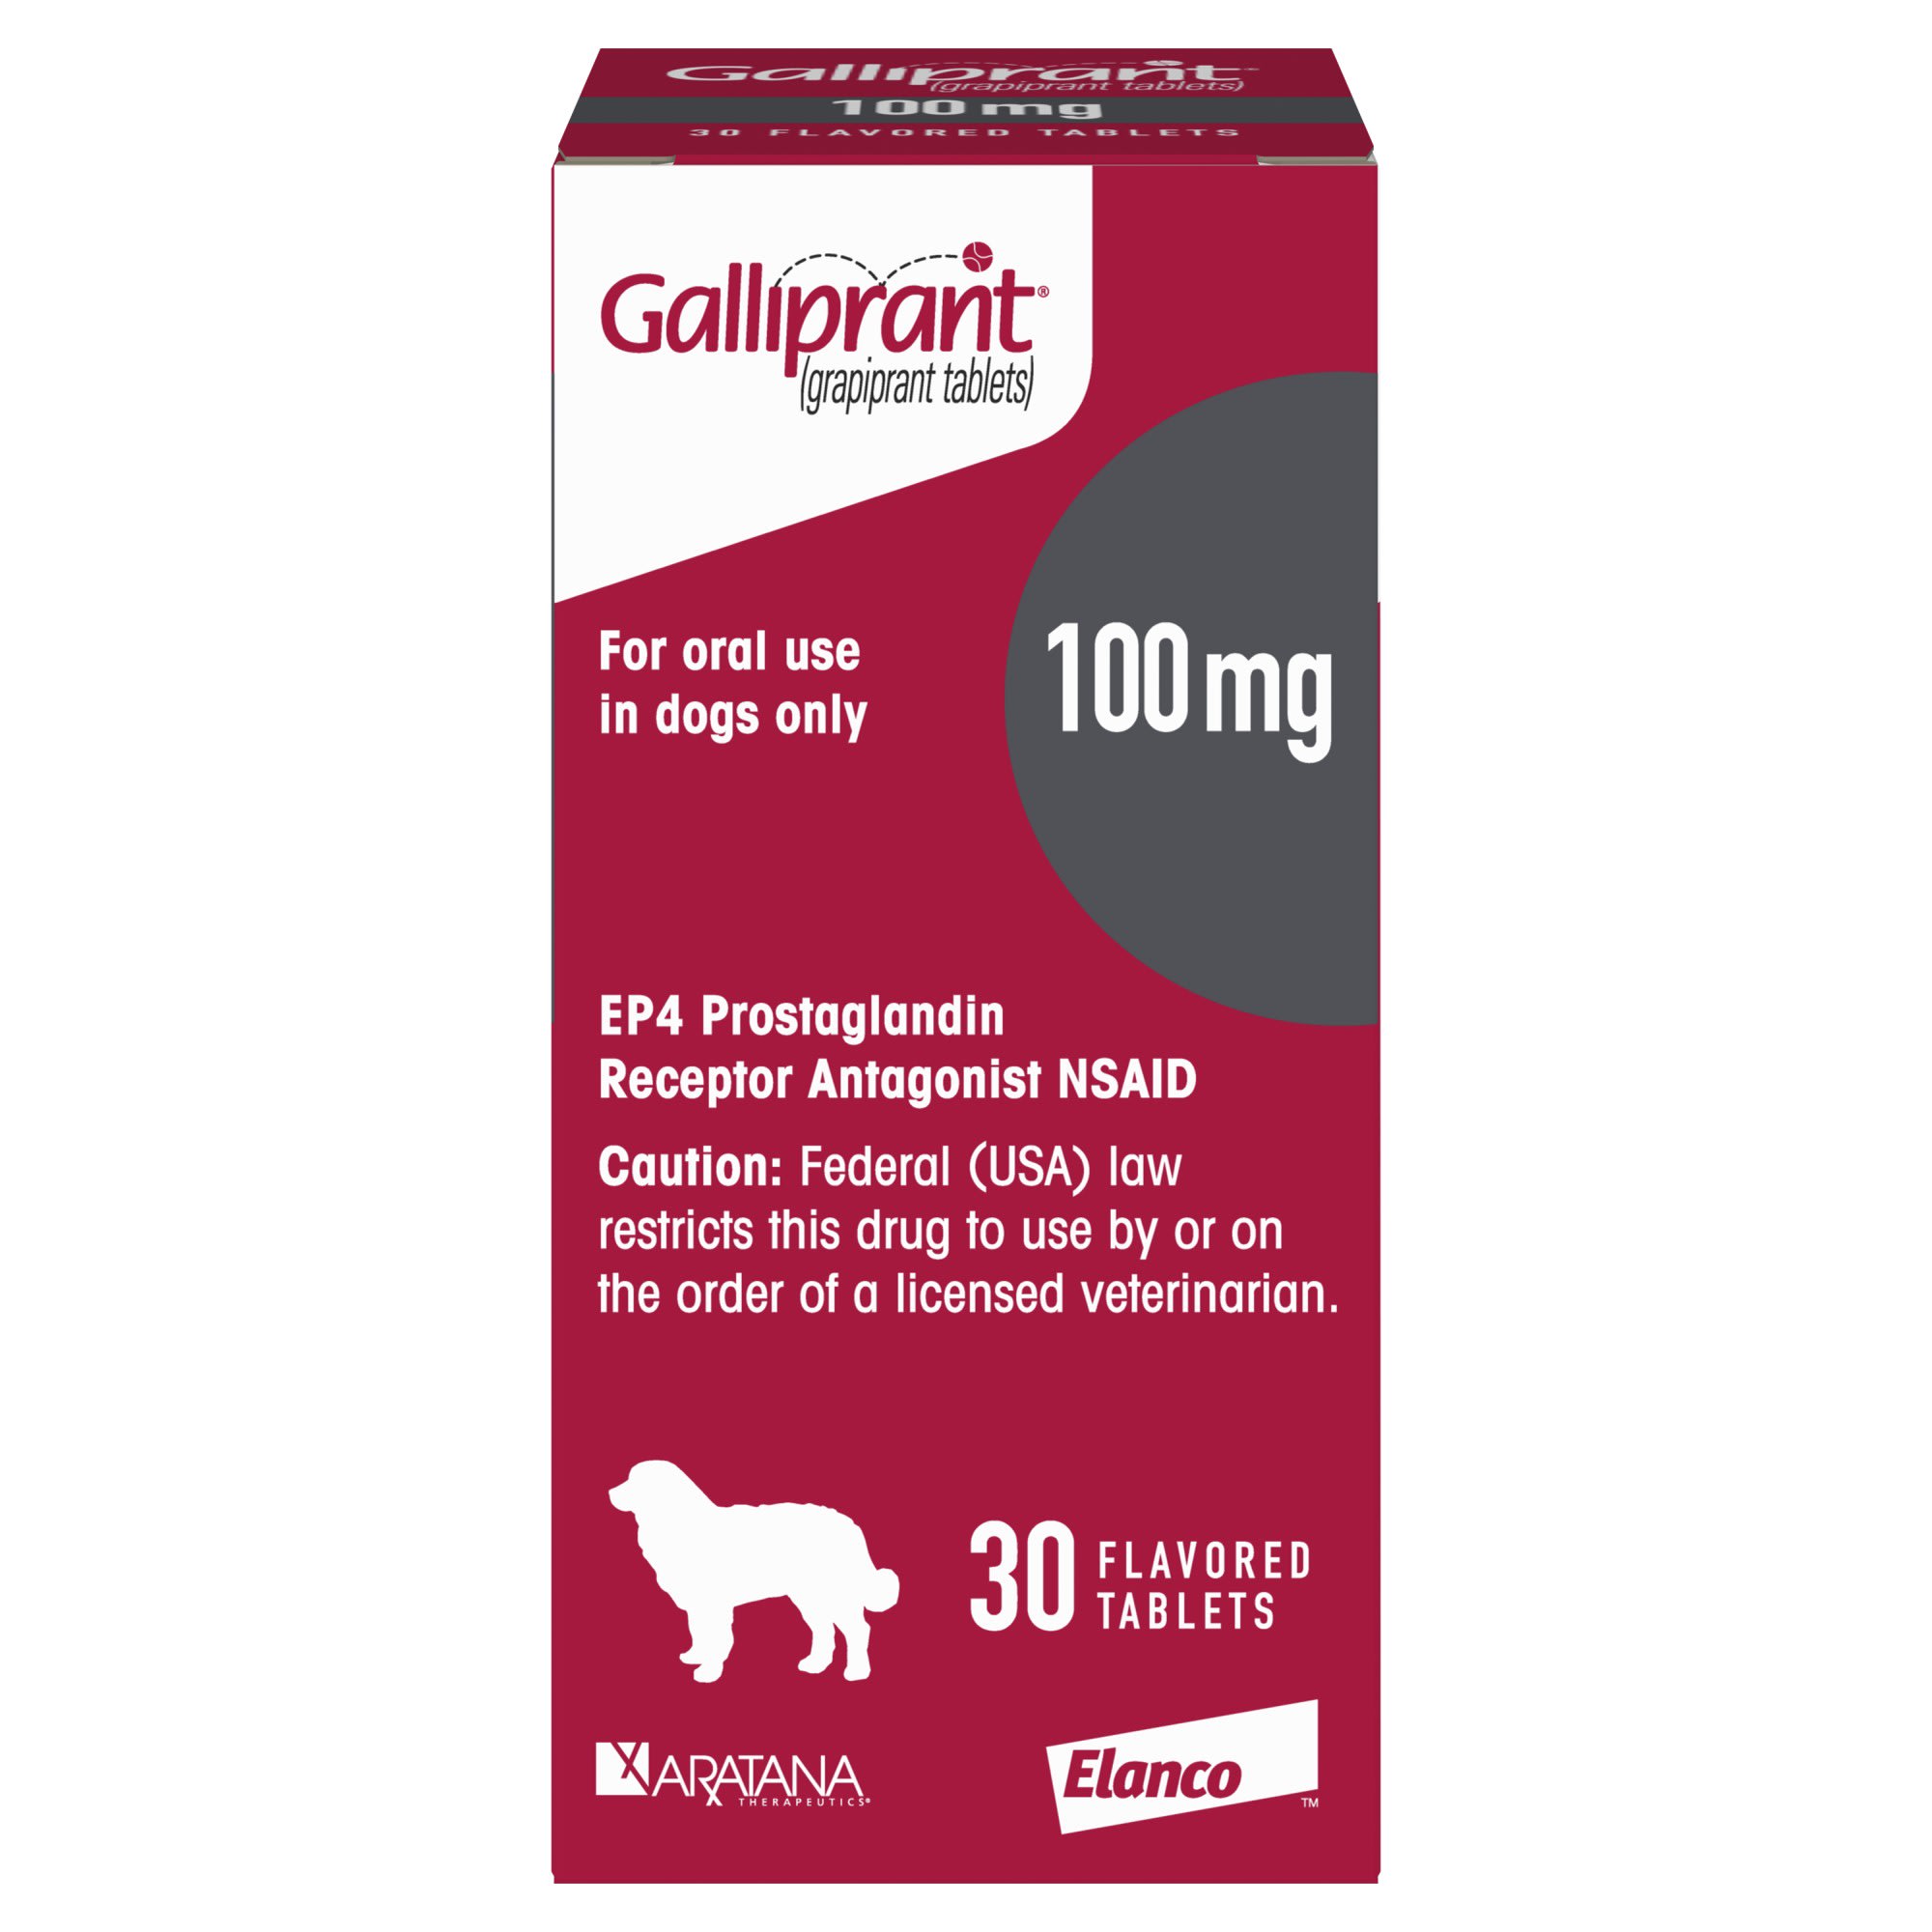 Galliprant 100 mg Flavored Tablets for 